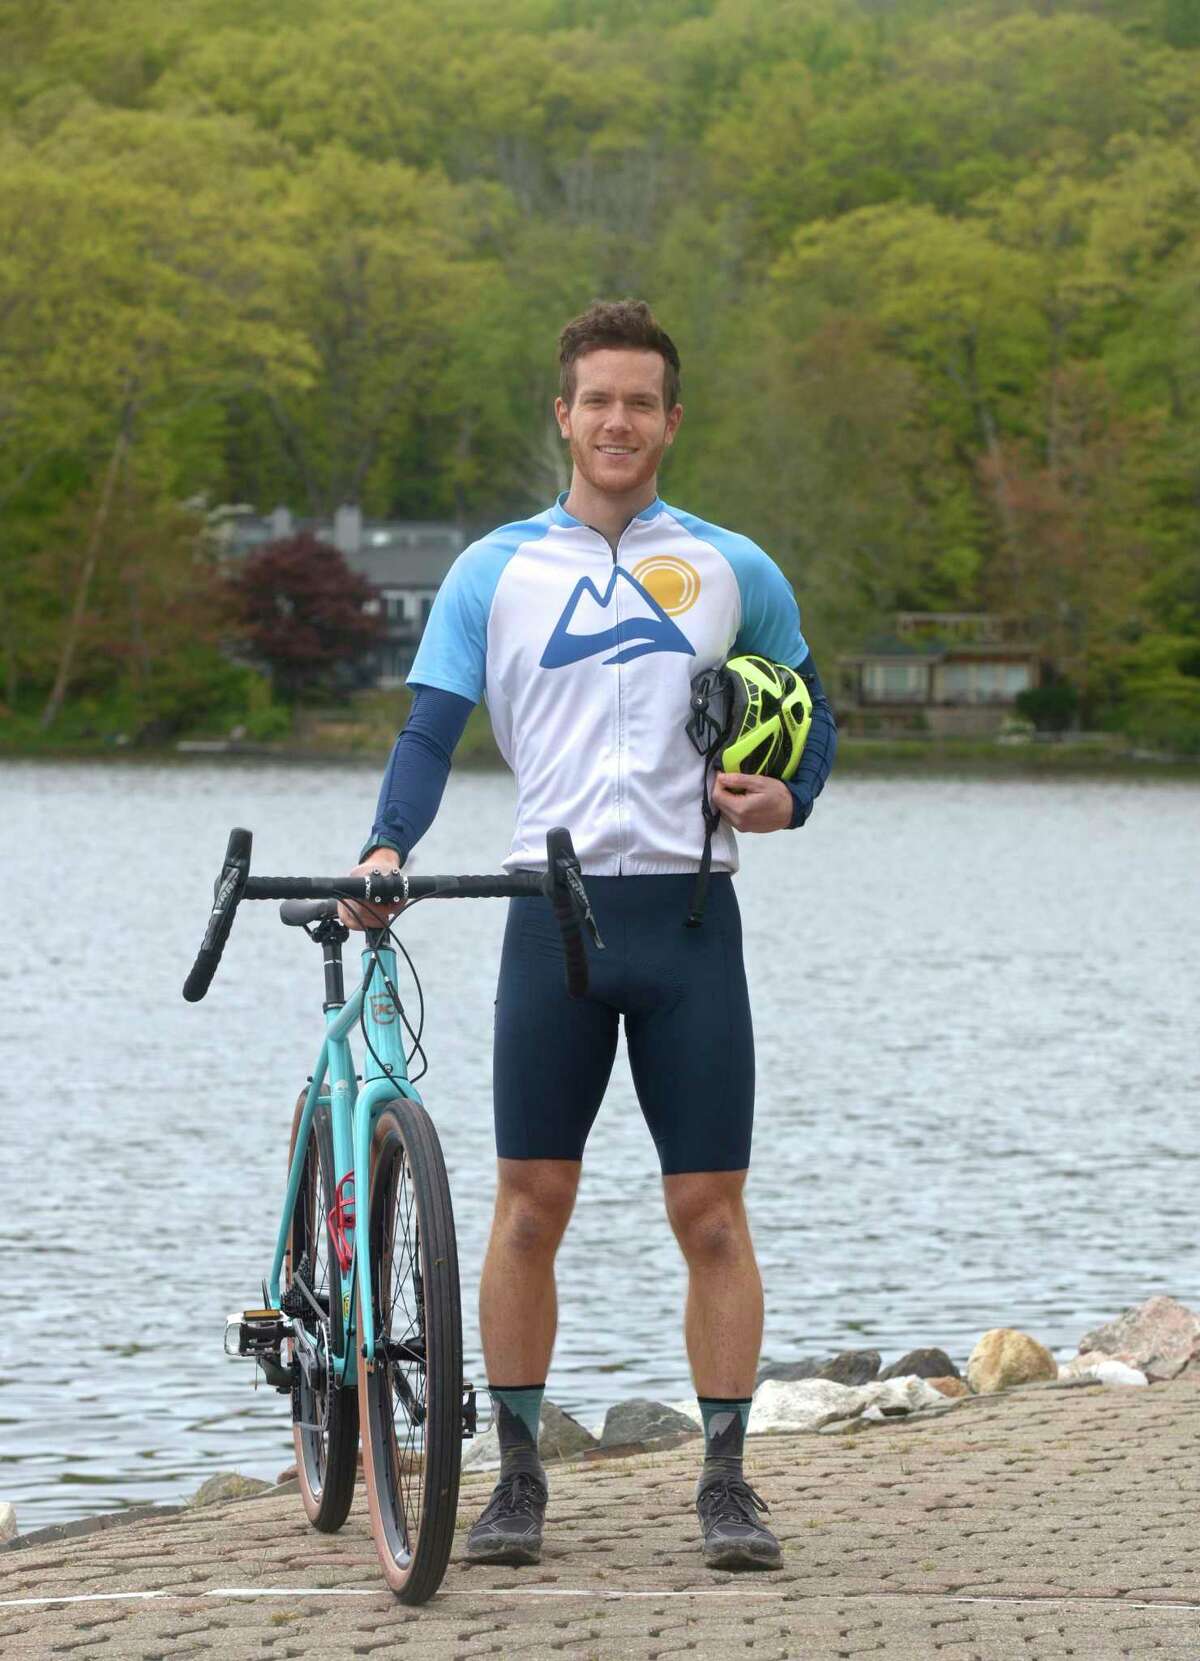 Ben Grannis will be biking cross-country in support of the organization 'TextLess Live More'. Grannis hopes to raise awareness of distracted driving. Monday, May 10, 2021, in Ridgefield, Conn.